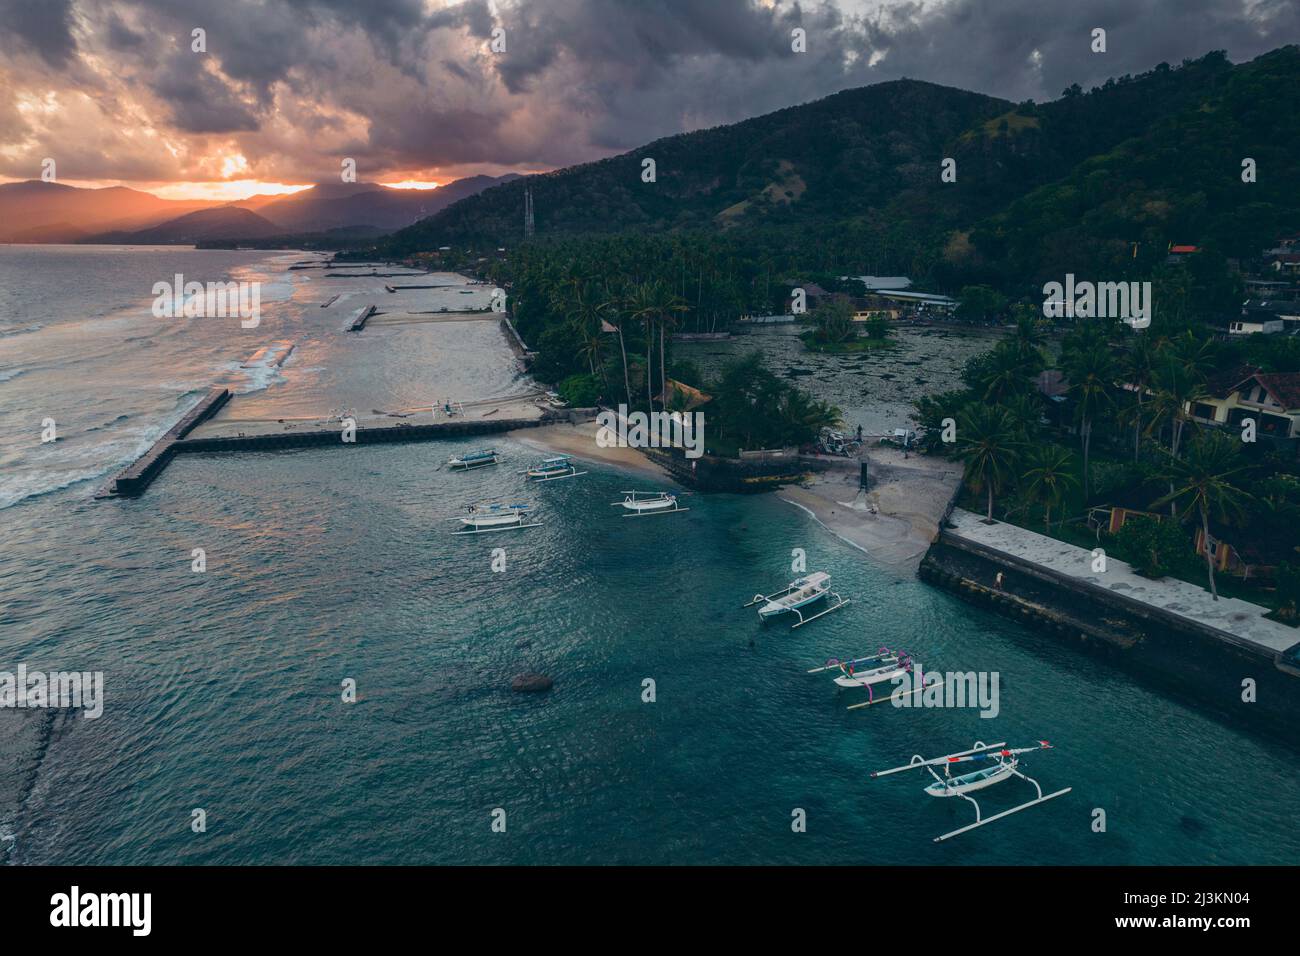 Aerial view of jukung canoes moored at a dock and along the shore of Candidasa Beach with sunlight streaming across the mountaintops under a grey c... Stock Photo